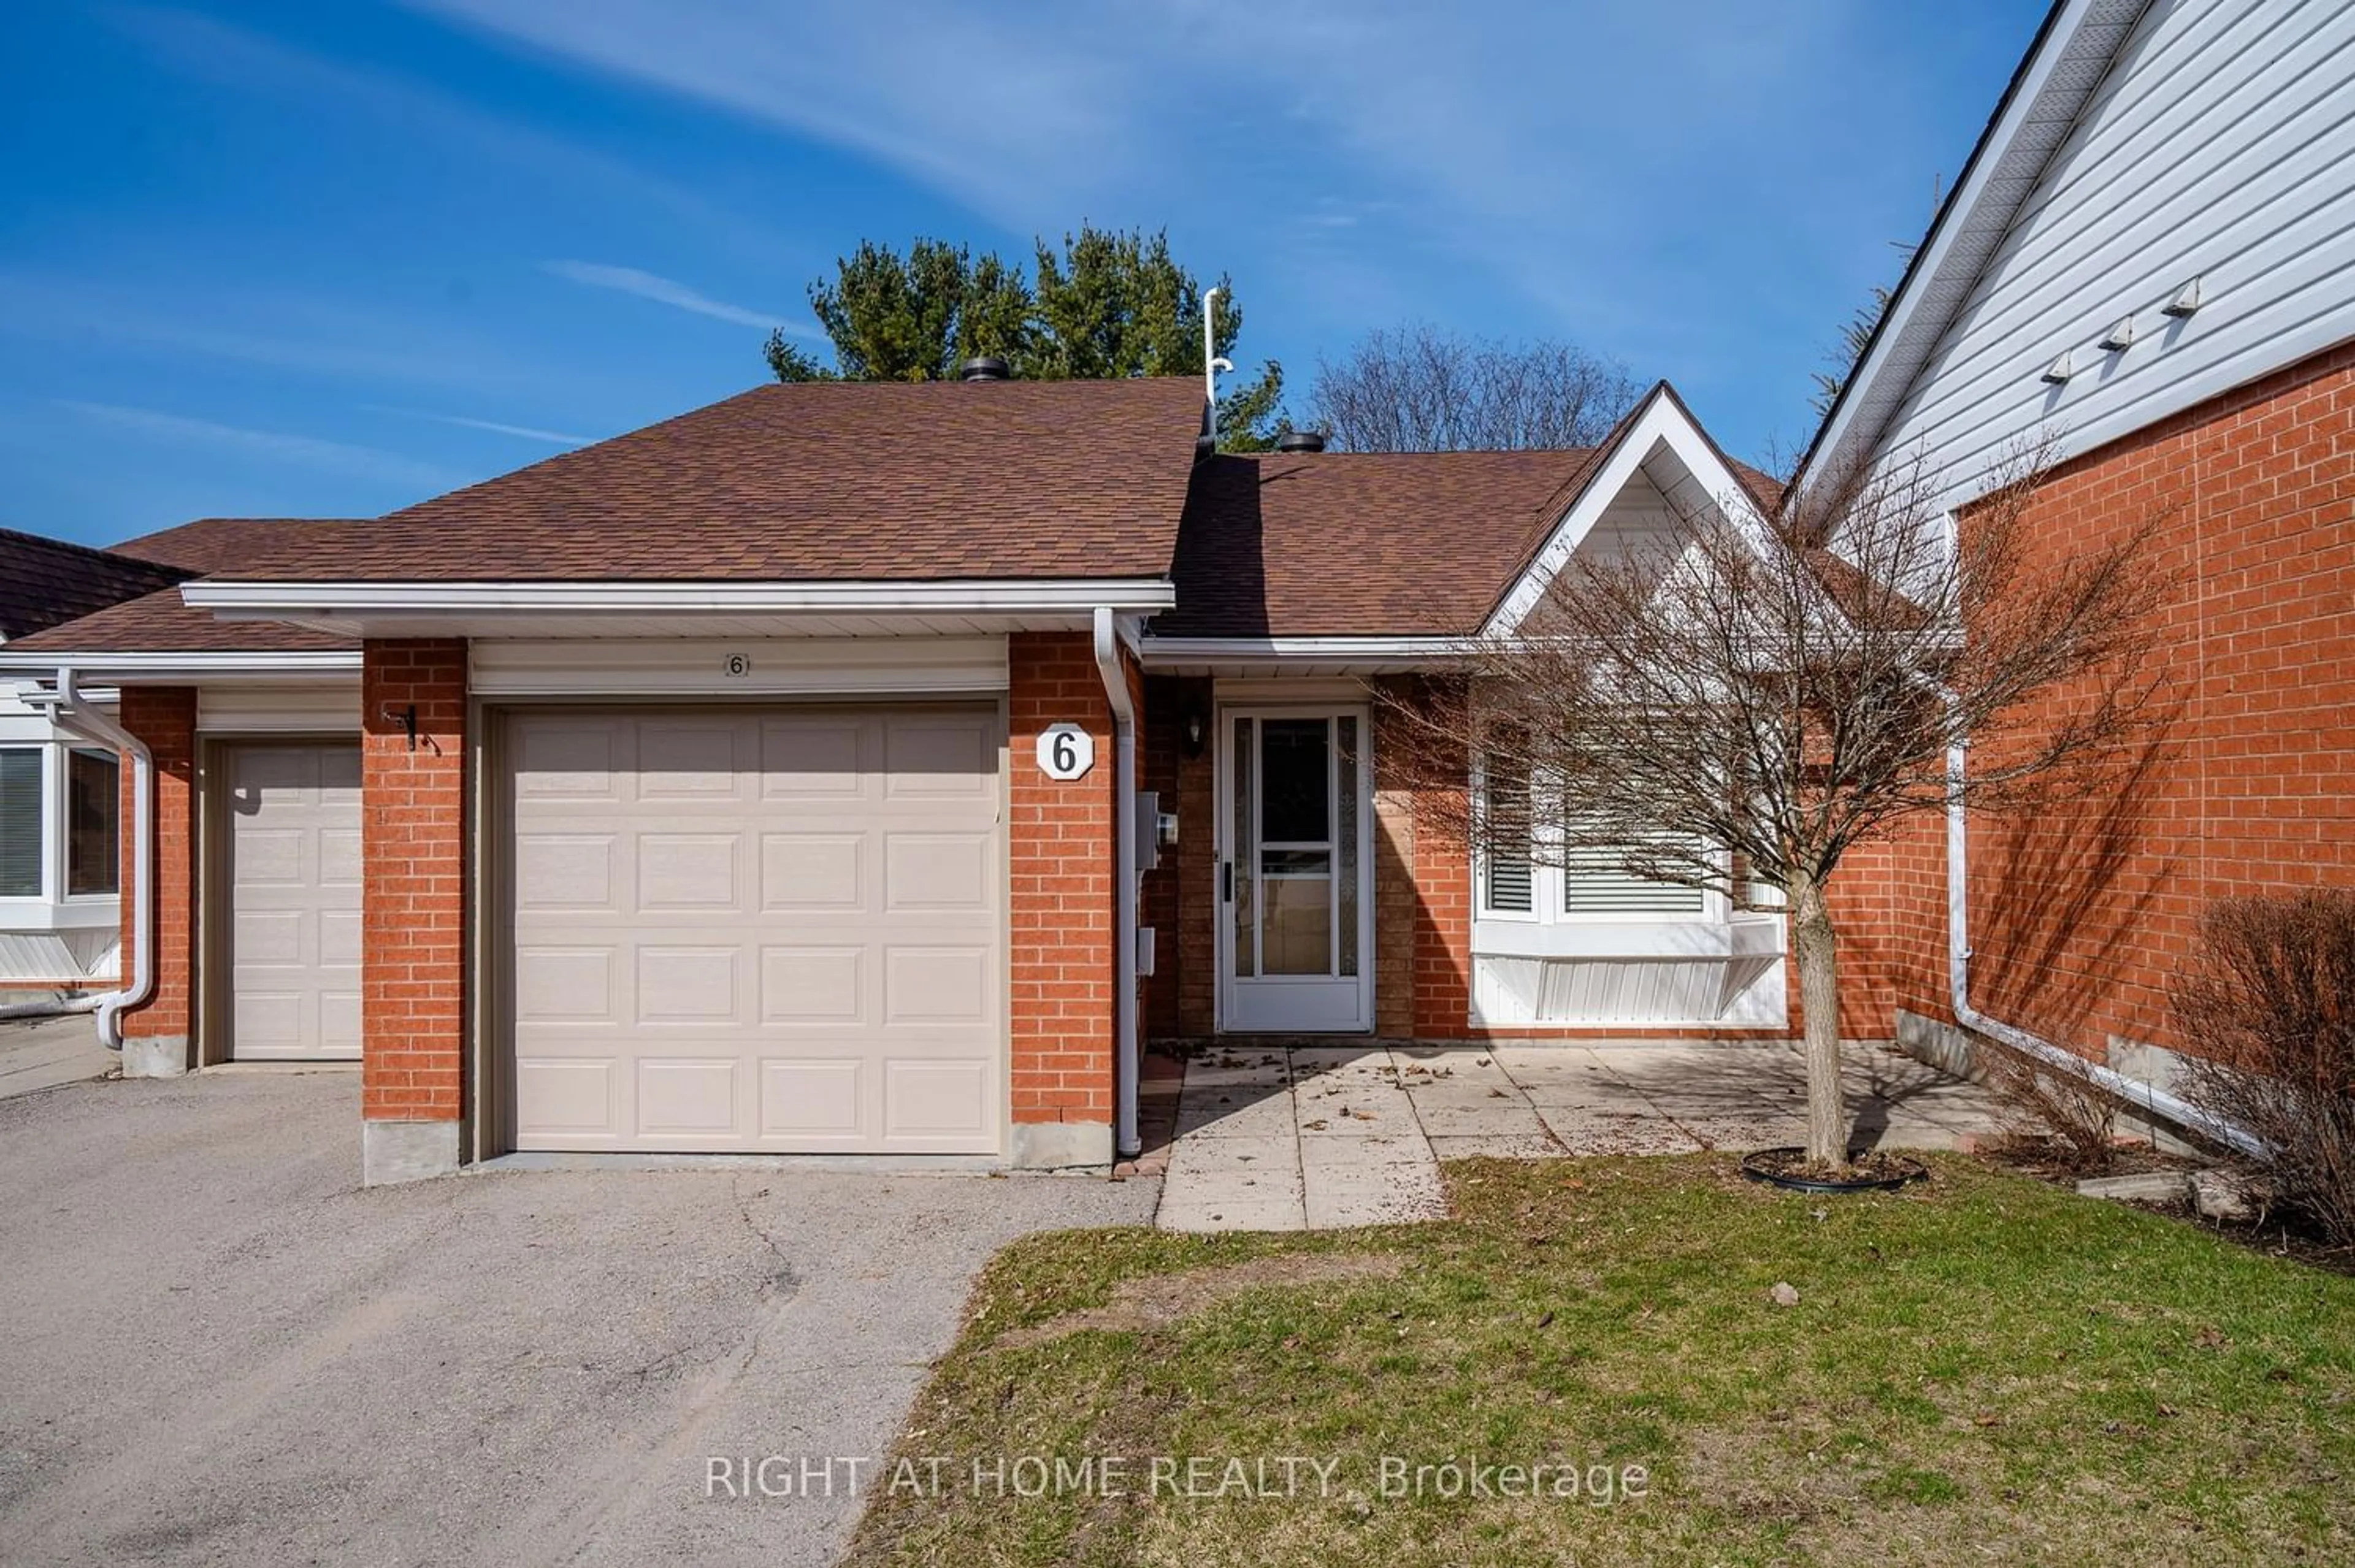 Home with brick exterior material for 696 King St #6, Midland Ontario L4R 5B5